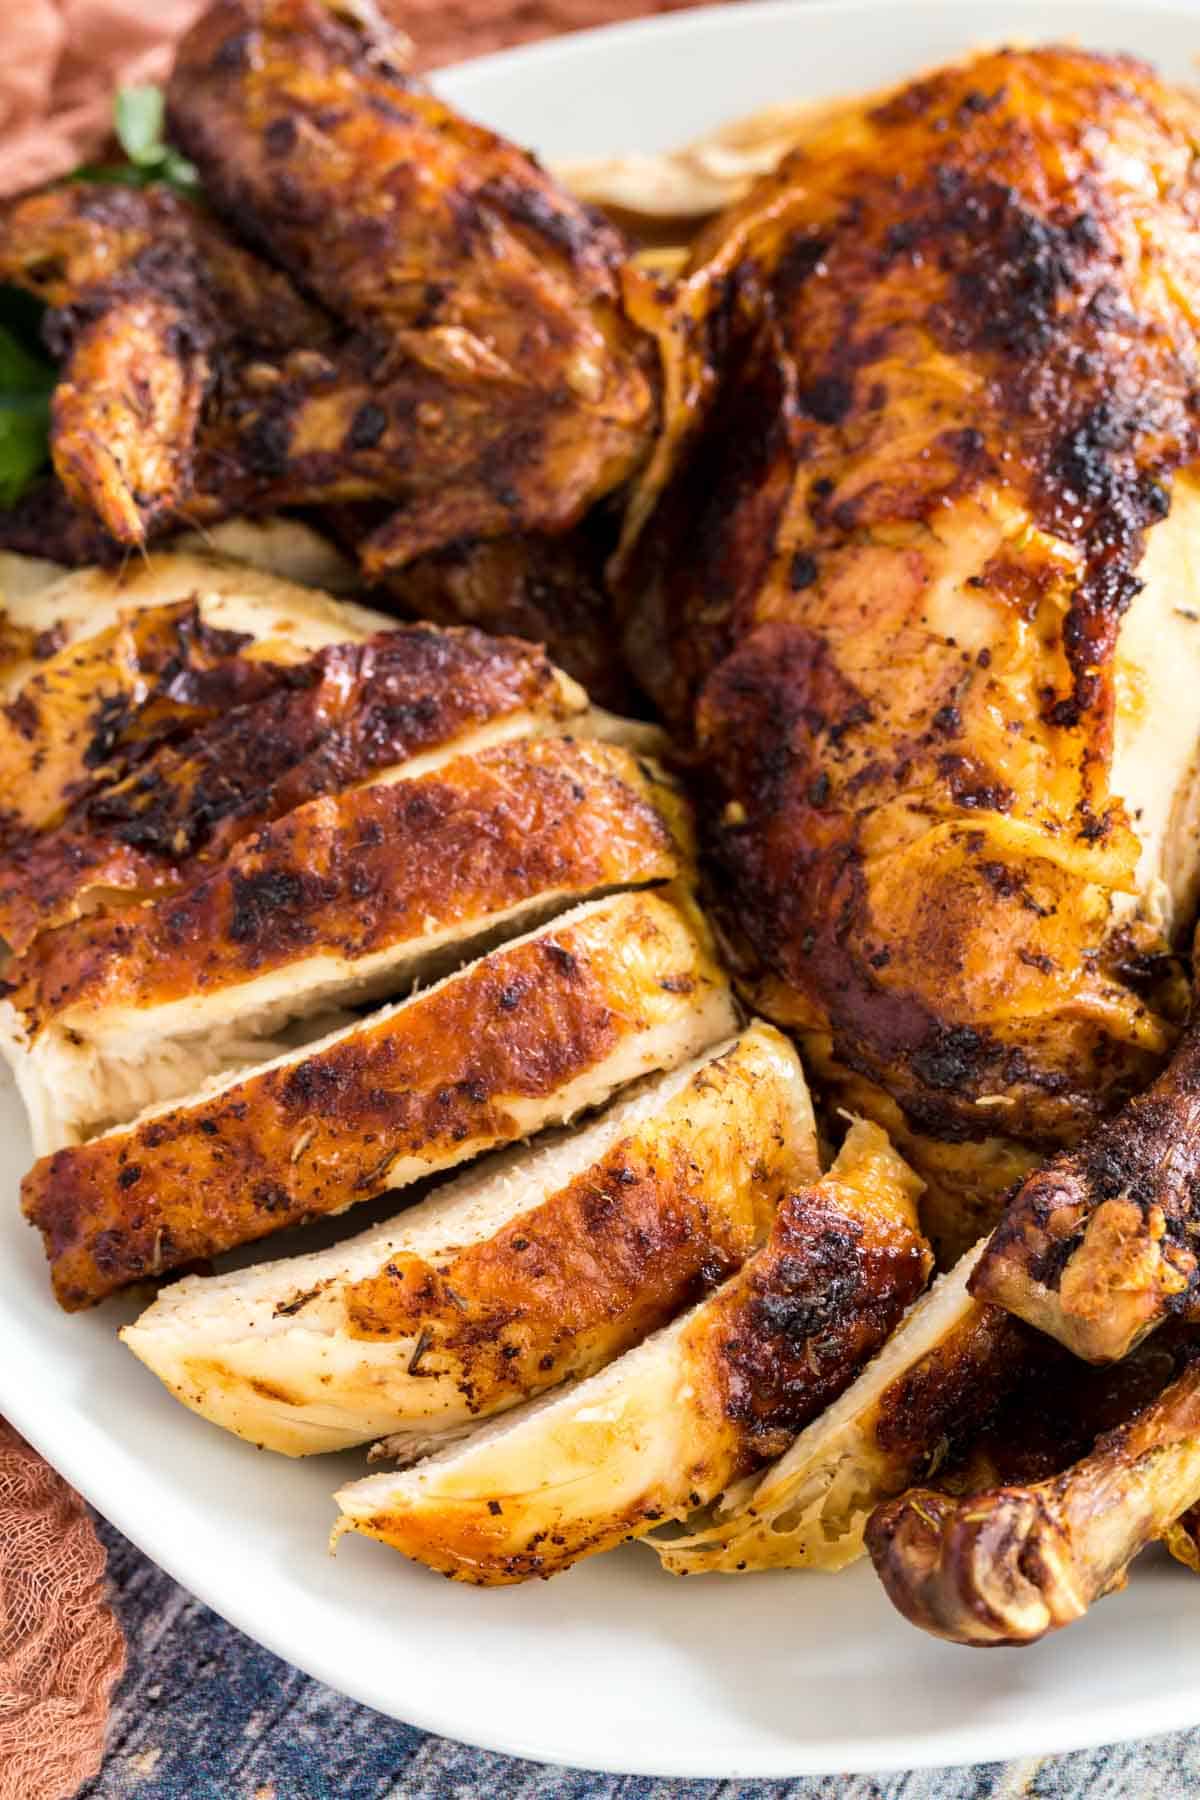 Close up of carved rotisserie chicken breasts and wings.